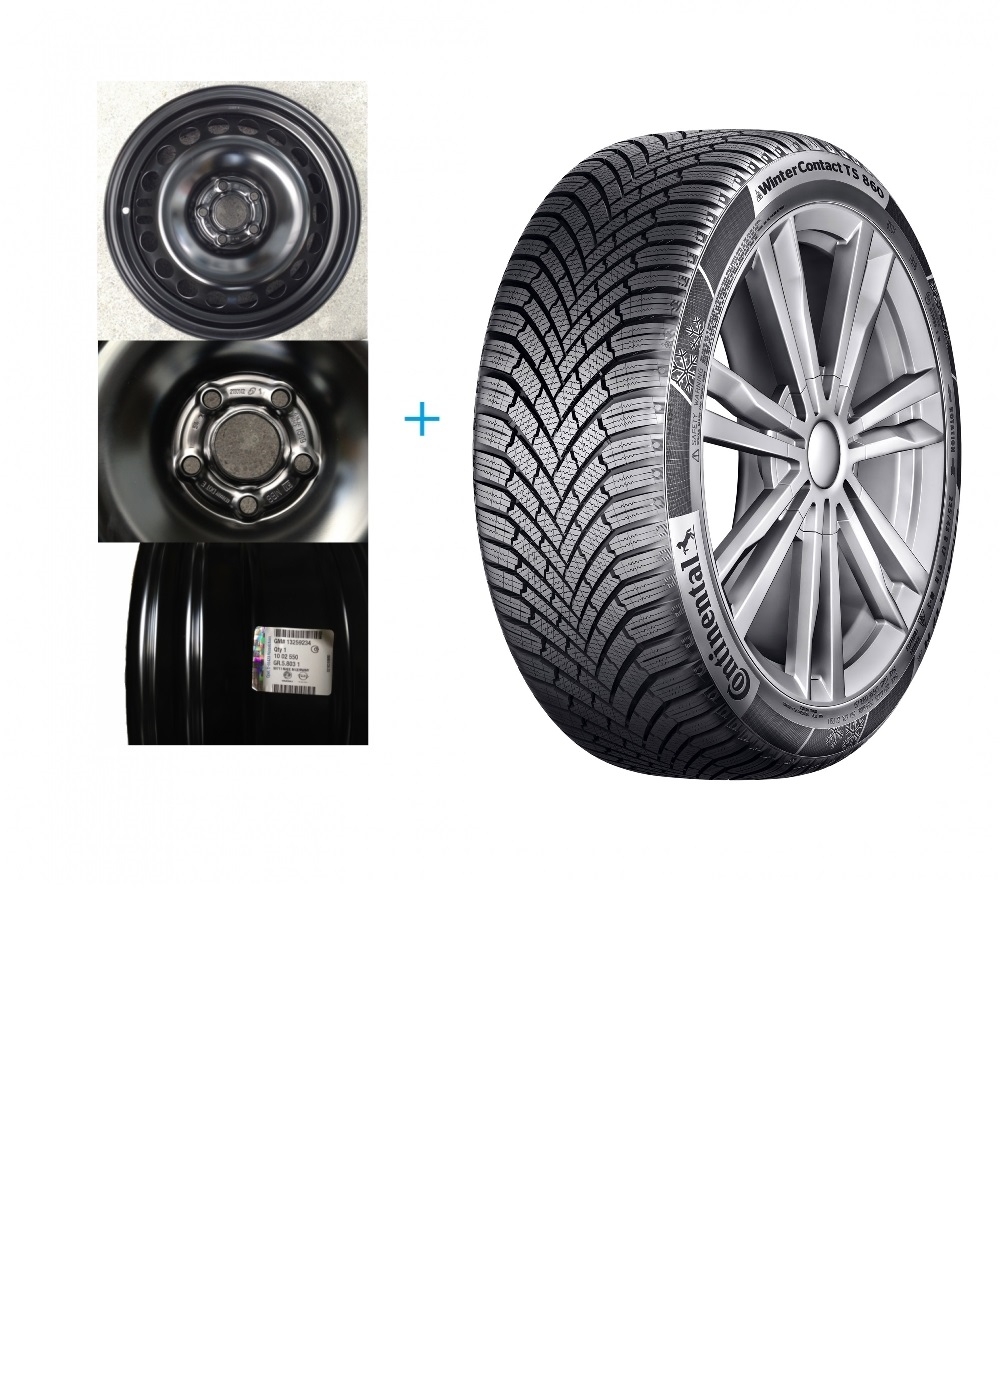 Kit janta Opel Astra K si anvelopa iarna 205/55/R16 Continental Winter Contact TS860 91H Pagina 2/anvelope-si-jante/piese-auto-skoda/opel-vectra-c - Piese auto Opel Astra K